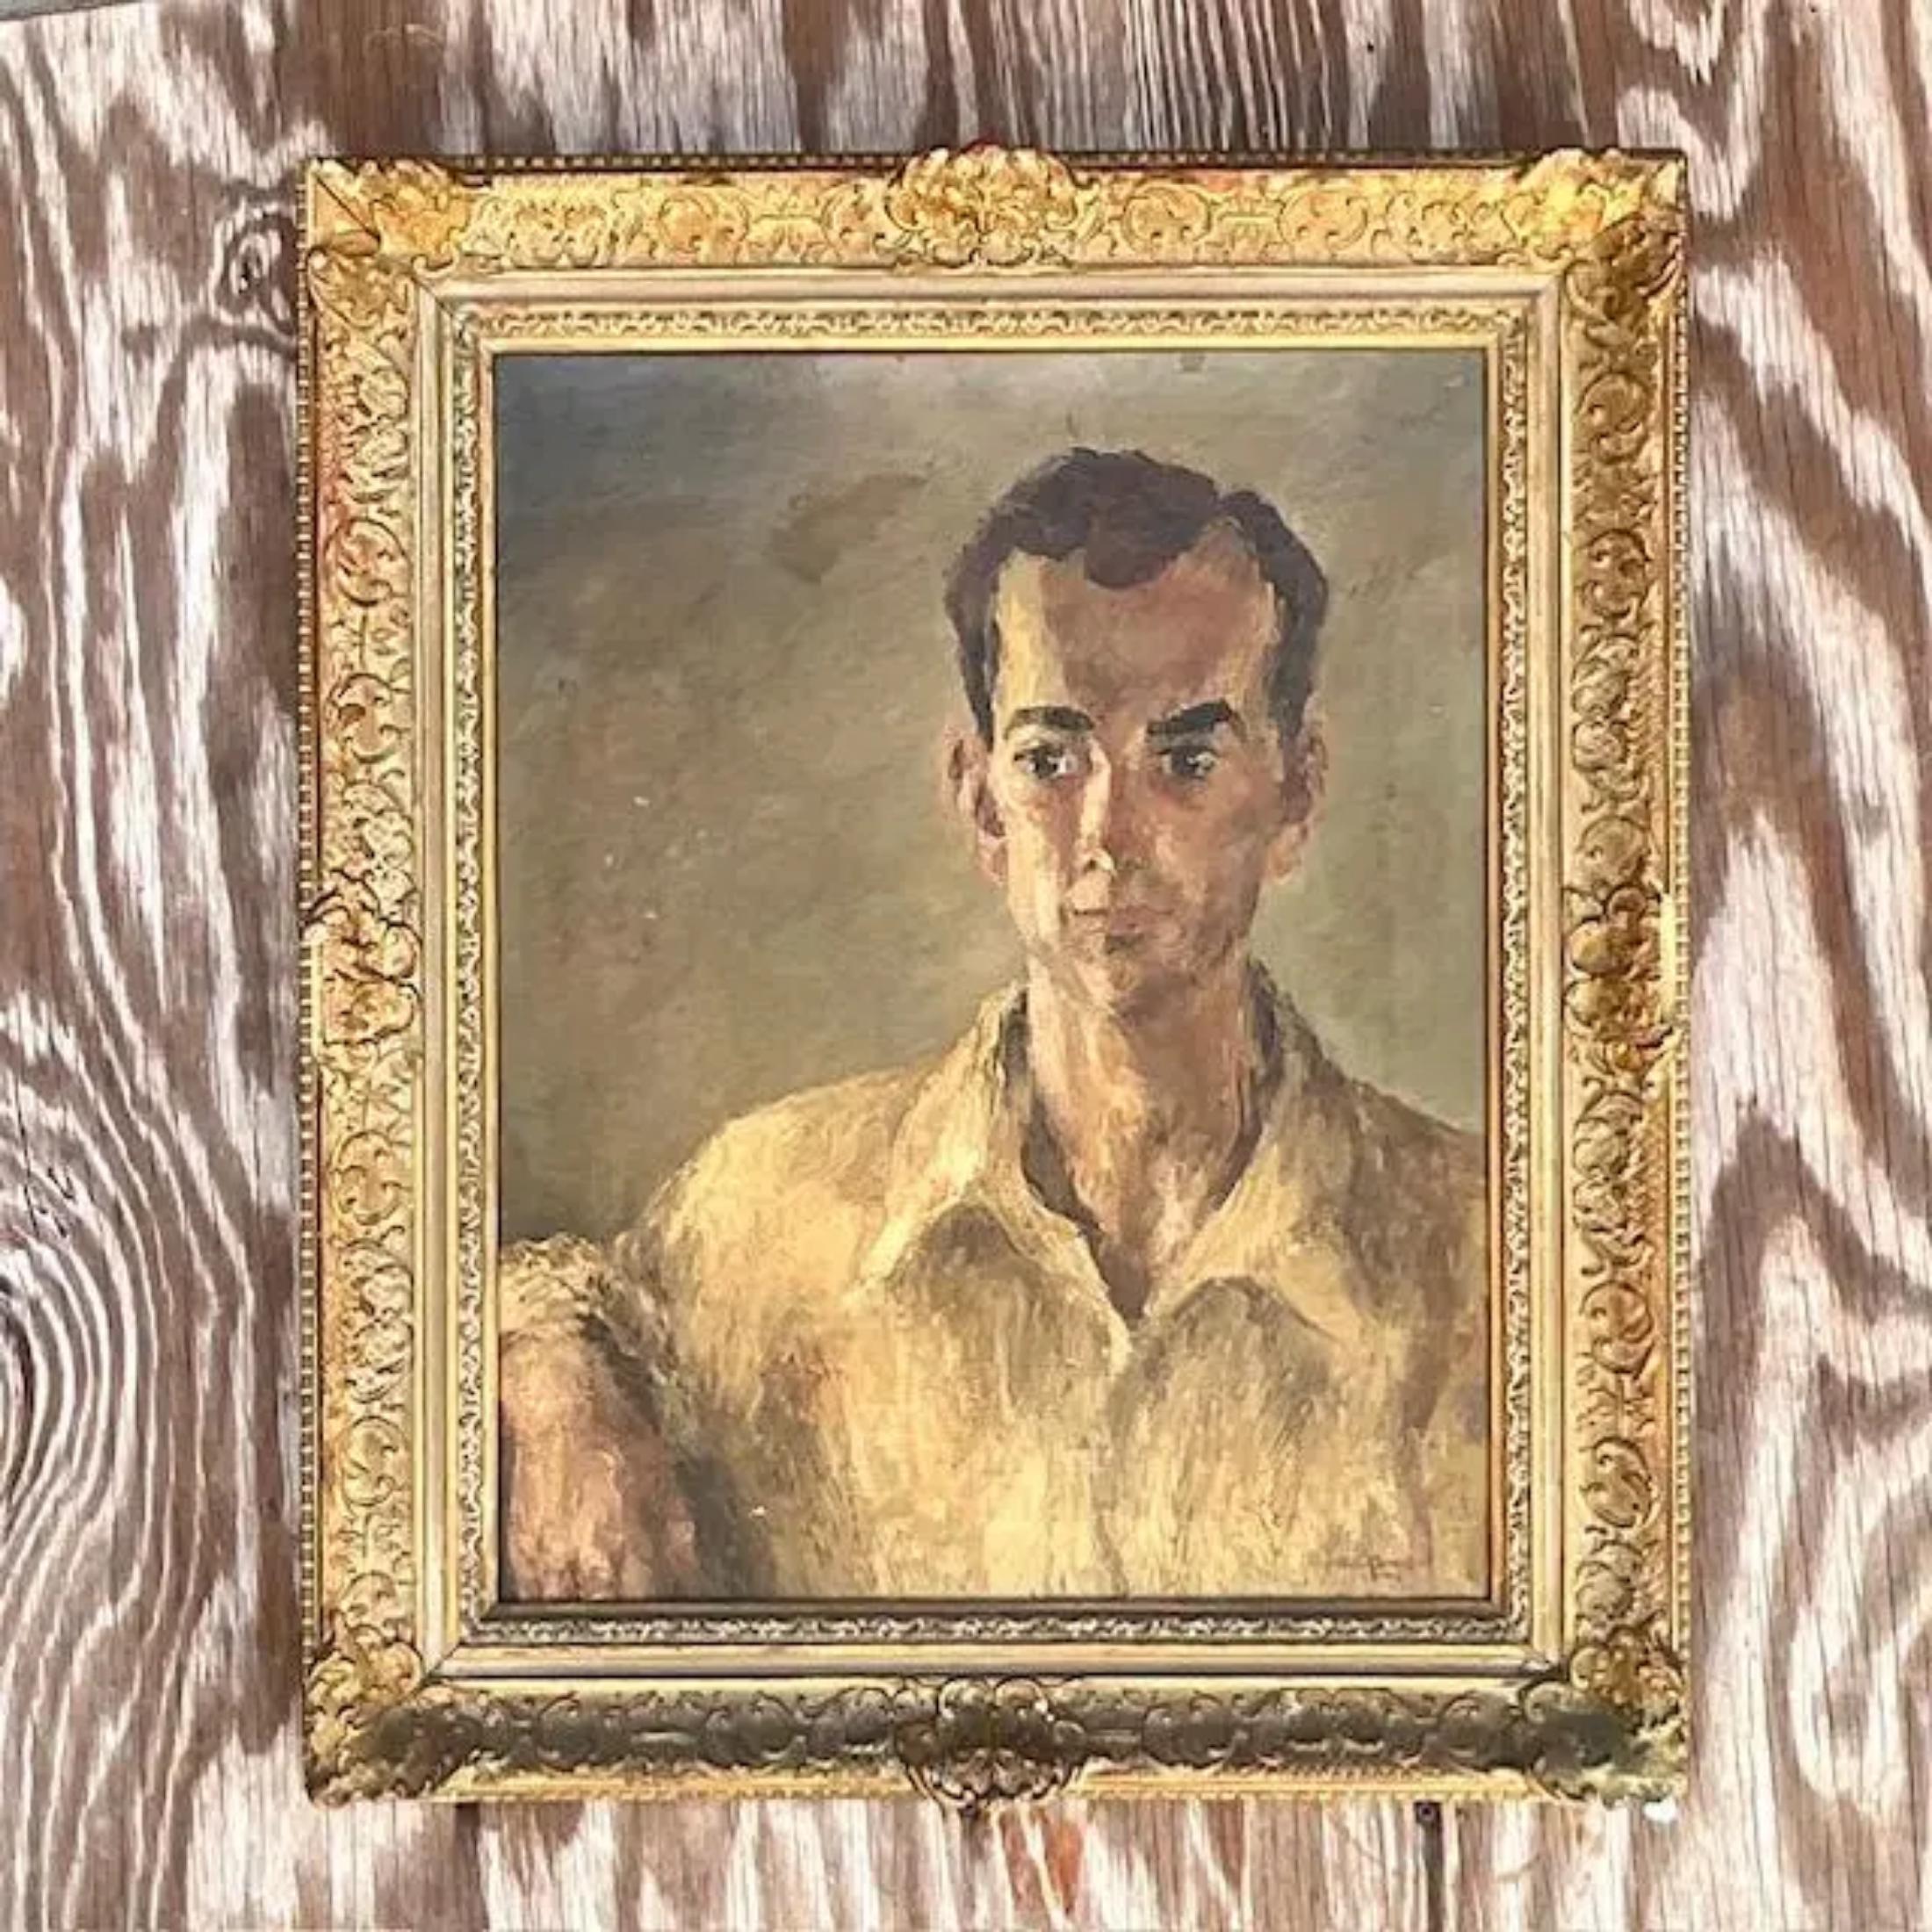 A striking vintage Regency oil portrait on canvas. A chic composition in the period style. Signed and dated by the artist. Acquired from a Palm Beach estate